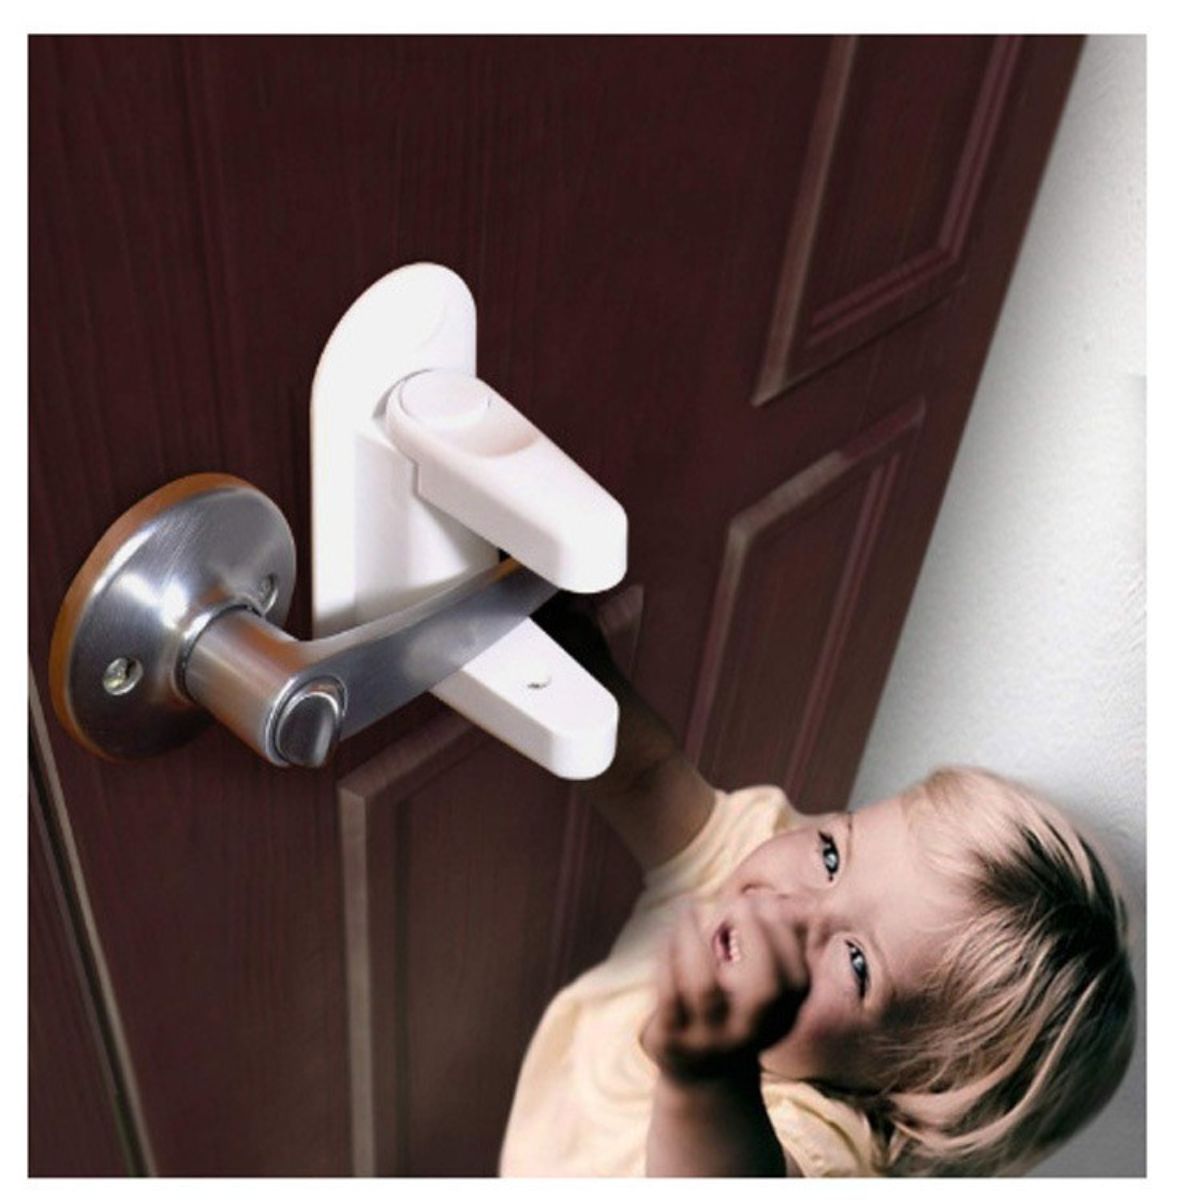 Riolio ABS Improved Childproof DOOR Lever Lock Prevents Toddlers From Opening DOORs Wholesale